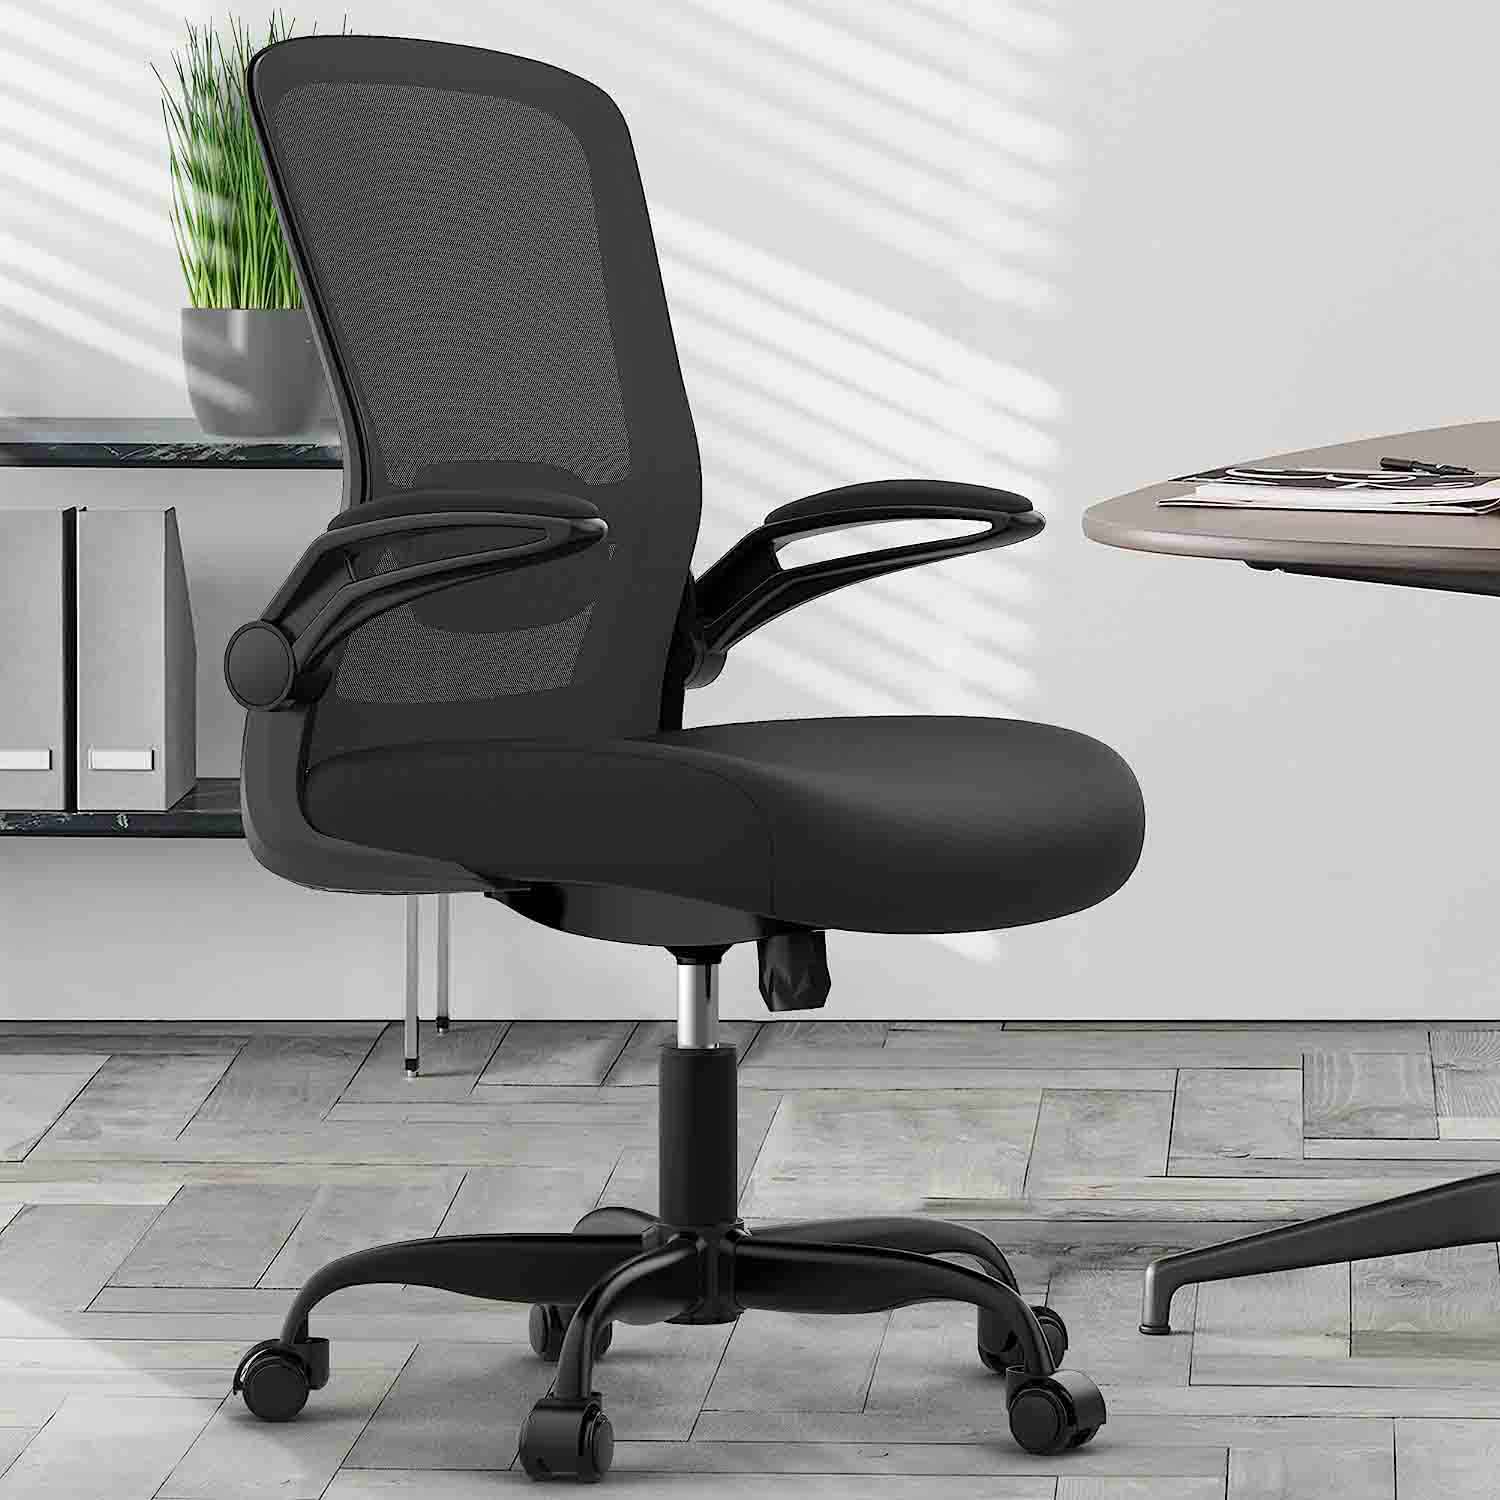 Black office chair in office setting